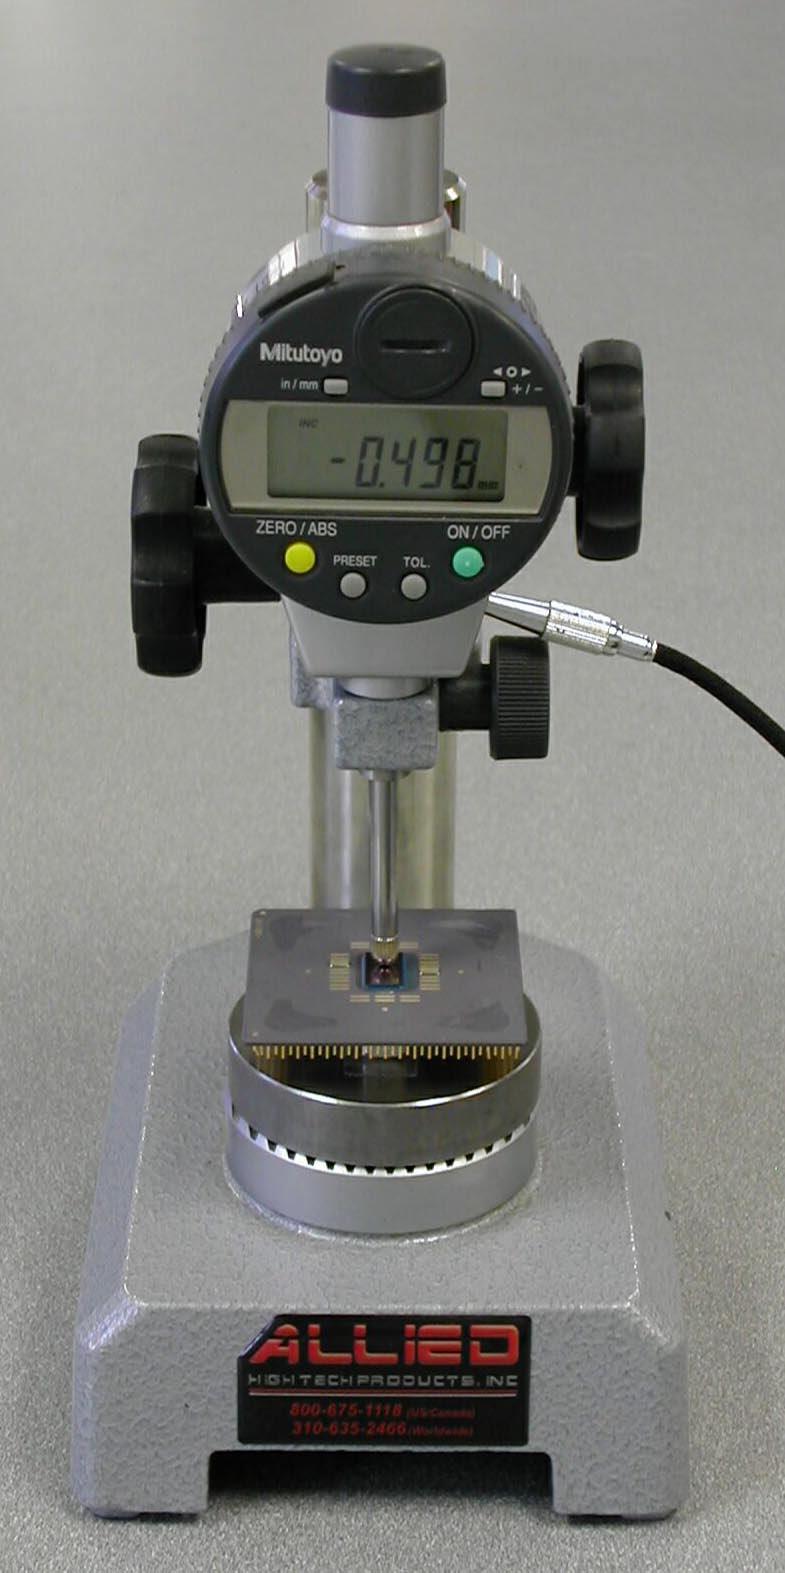 Note: Polishing rates will vary depending on the surface area, load, abrasive size and abrasive condition (new vs. used). This documented procedure is based on polishing a die measuring 144mm².